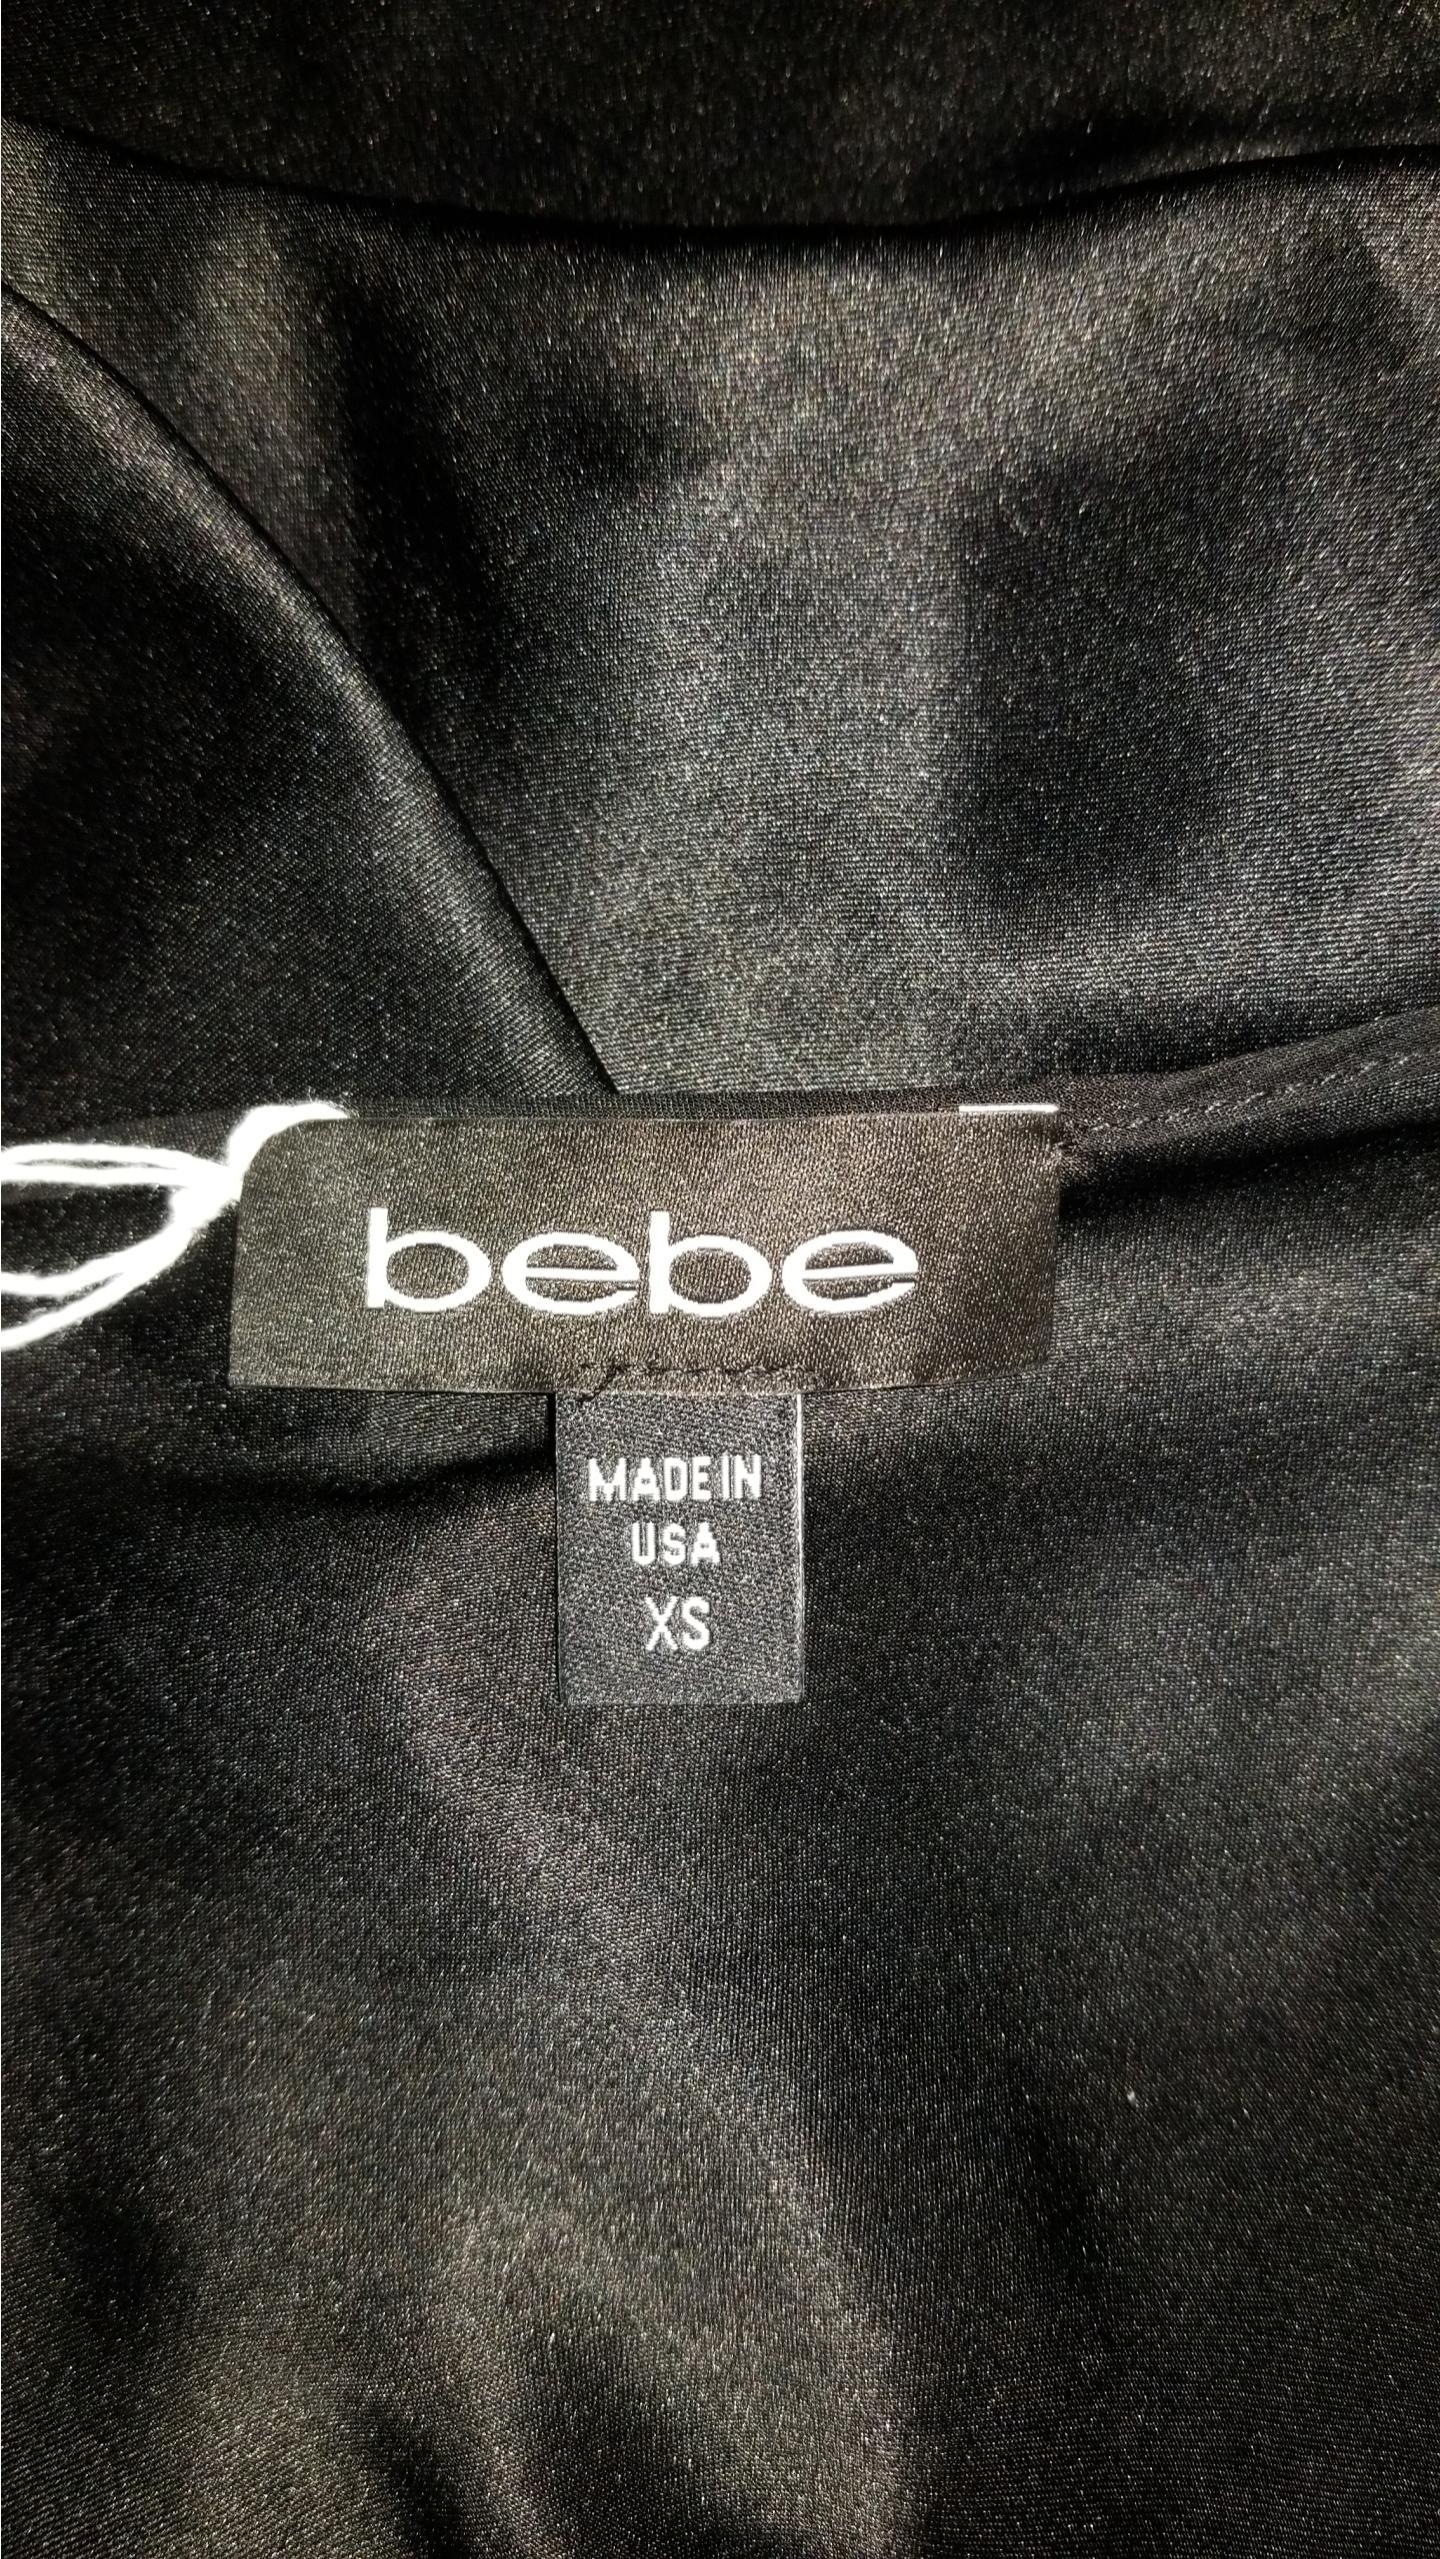 Bebe Pure Silk Black Twisted Back Sleeveless Top, Very soft to touch material, Black, 100% Silk, women's Tops, women's Black Tops, Bebe women's Tops, sleeveless top, black top, twisted back top